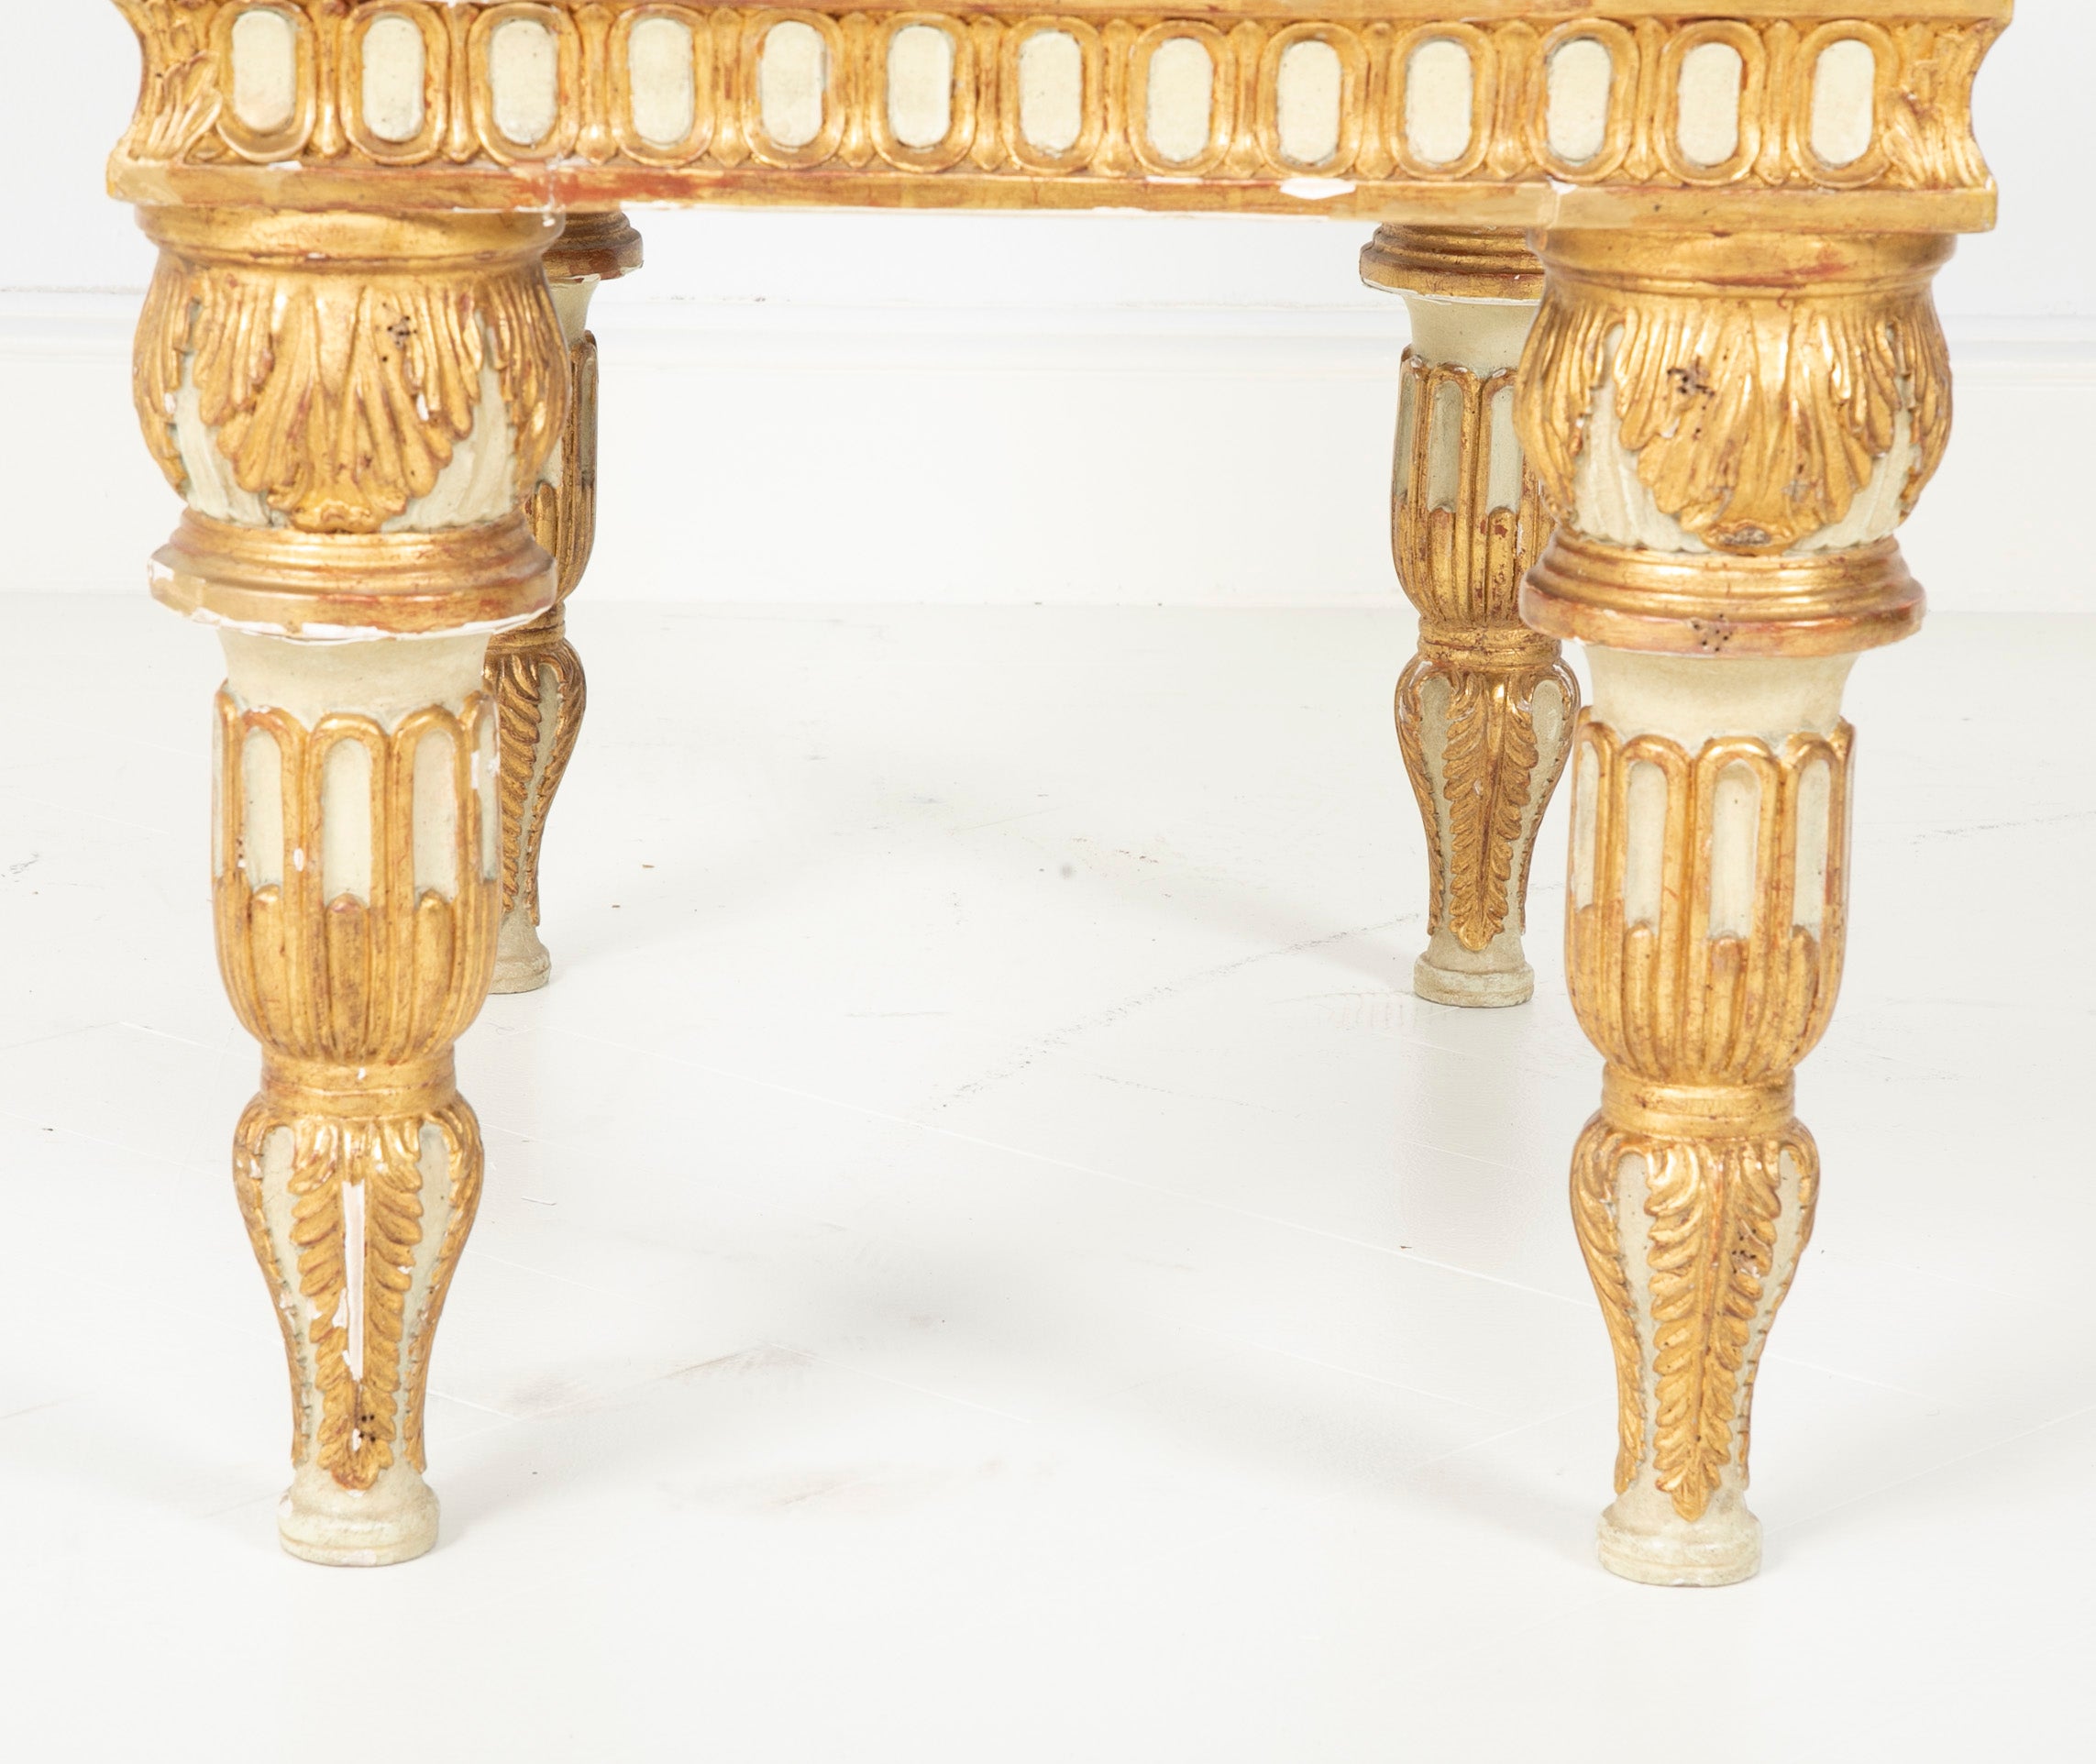 Painted & Gilt Bench Made in the Style of a Gianni Versace Estate Bench